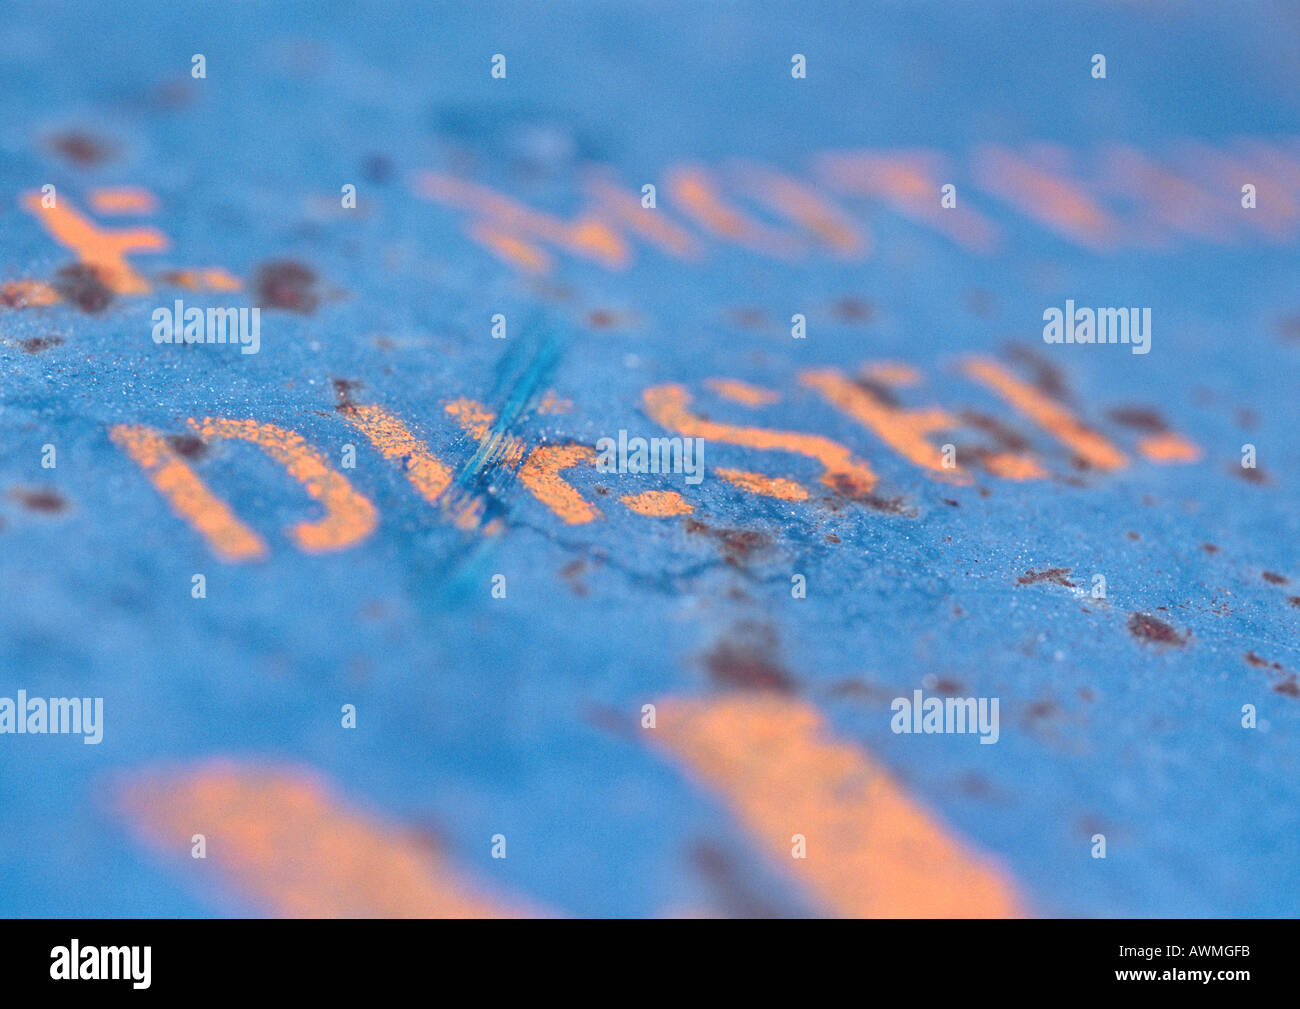 Diesel text stenciled on rusty surface, close-up Stock Photo